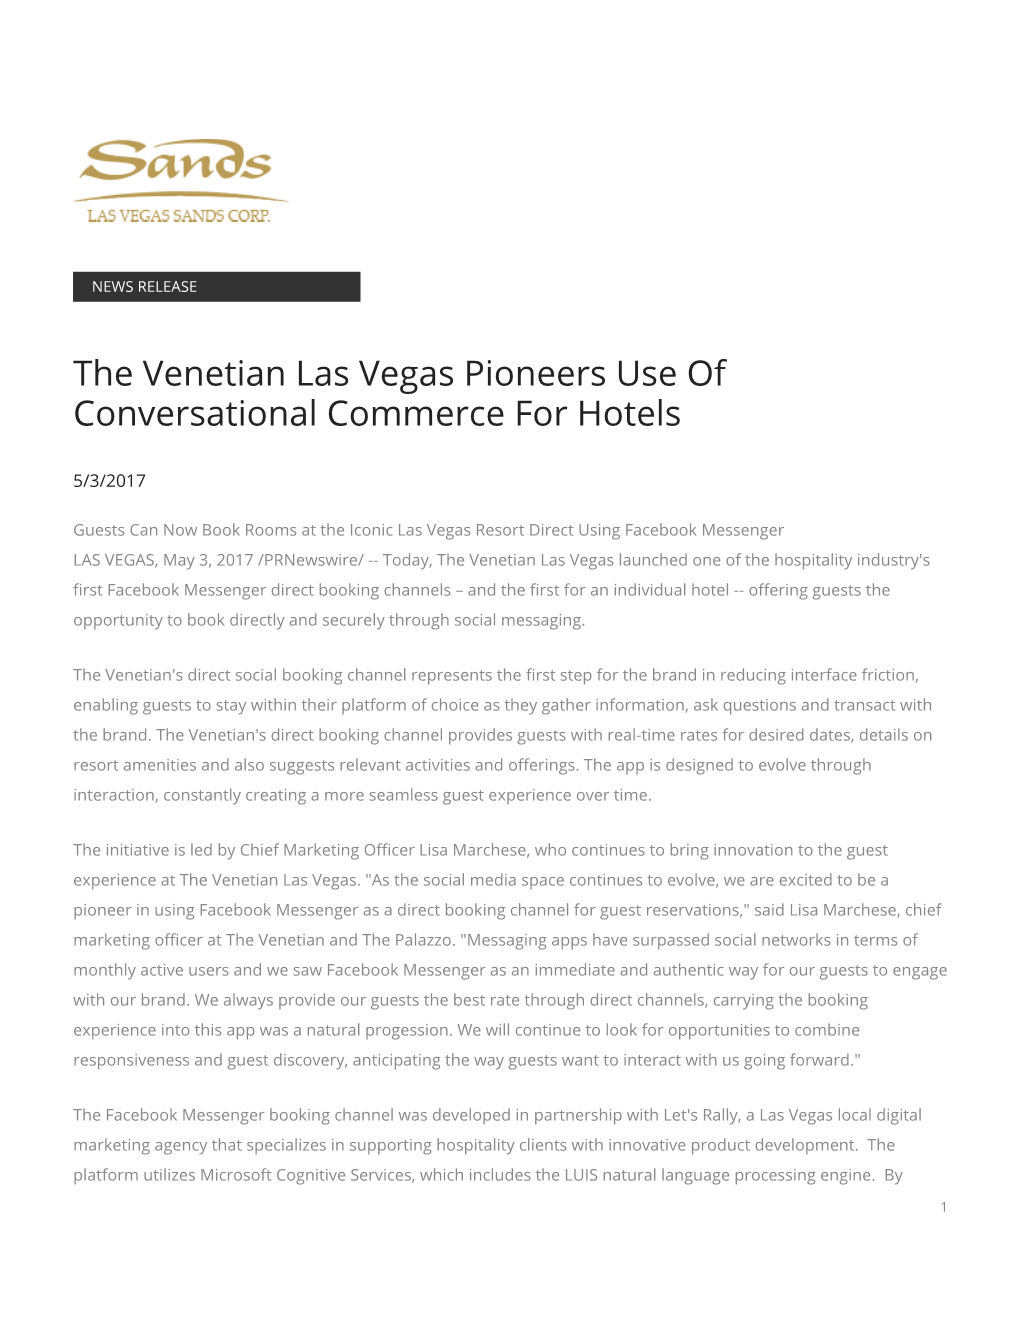 The Venetian Las Vegas Pioneers Use of Conversational Commerce for Hotels